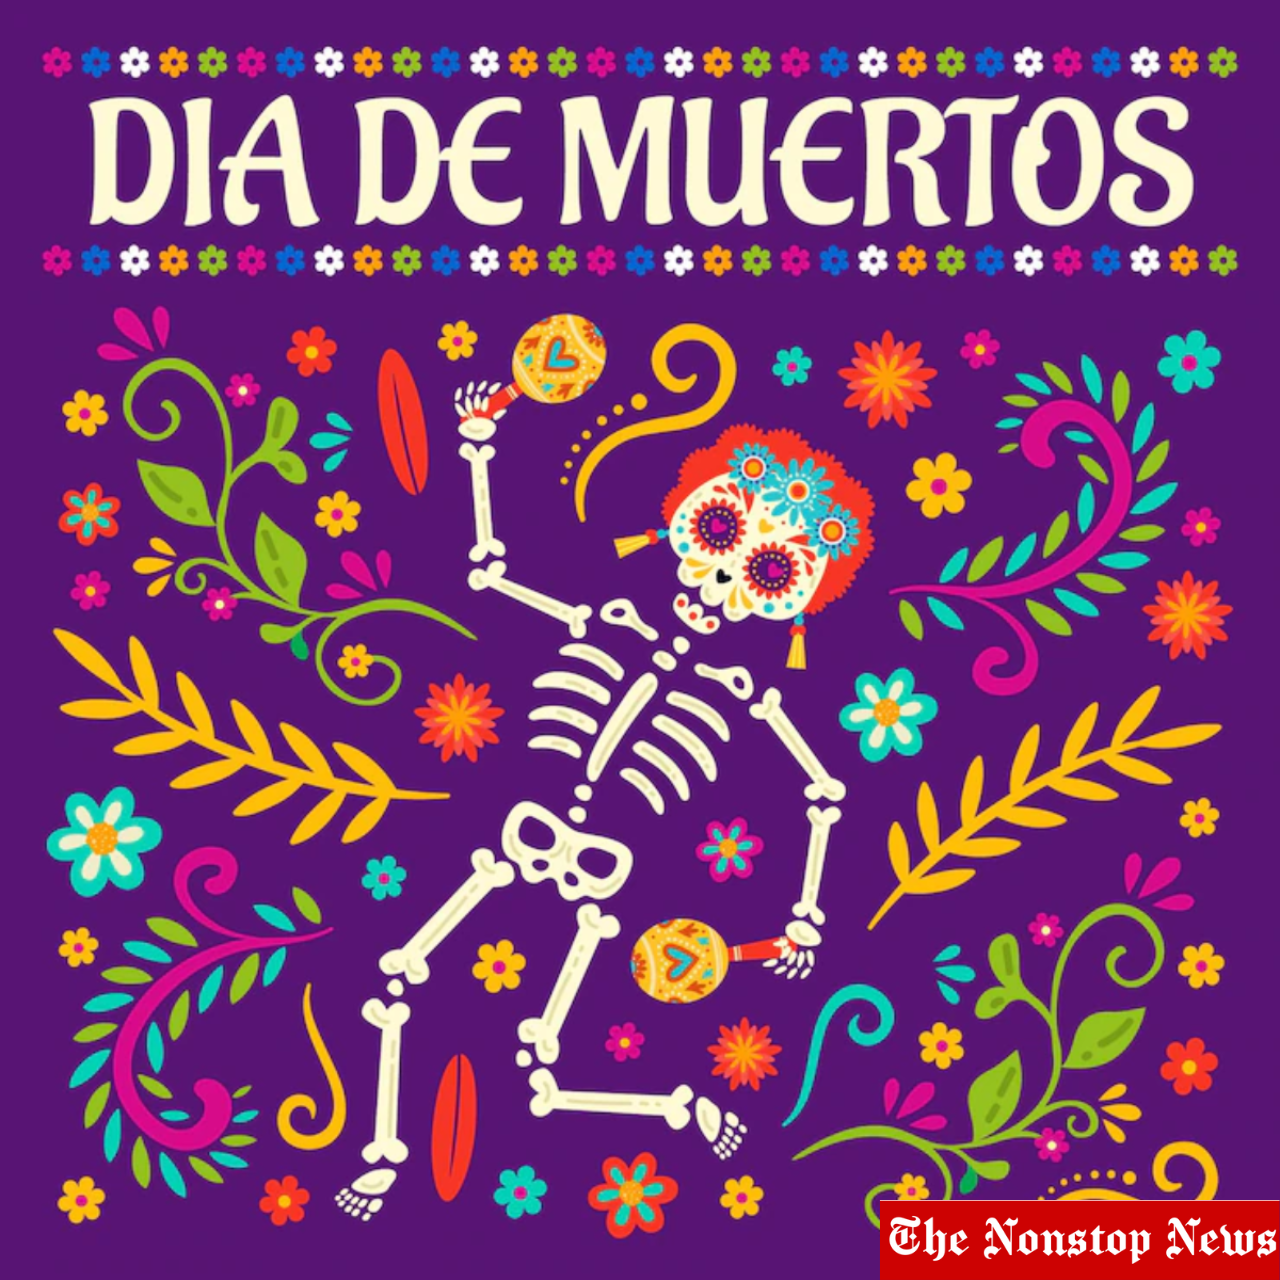 Day of the Dead 2022 Dia De Muertos WhatsApp Stickers, Twitter Messages, Facebook Greetings, Pinterest Quotes, Reddit Memes, Jokes, Sayings, HD Wallpapers and Wishes